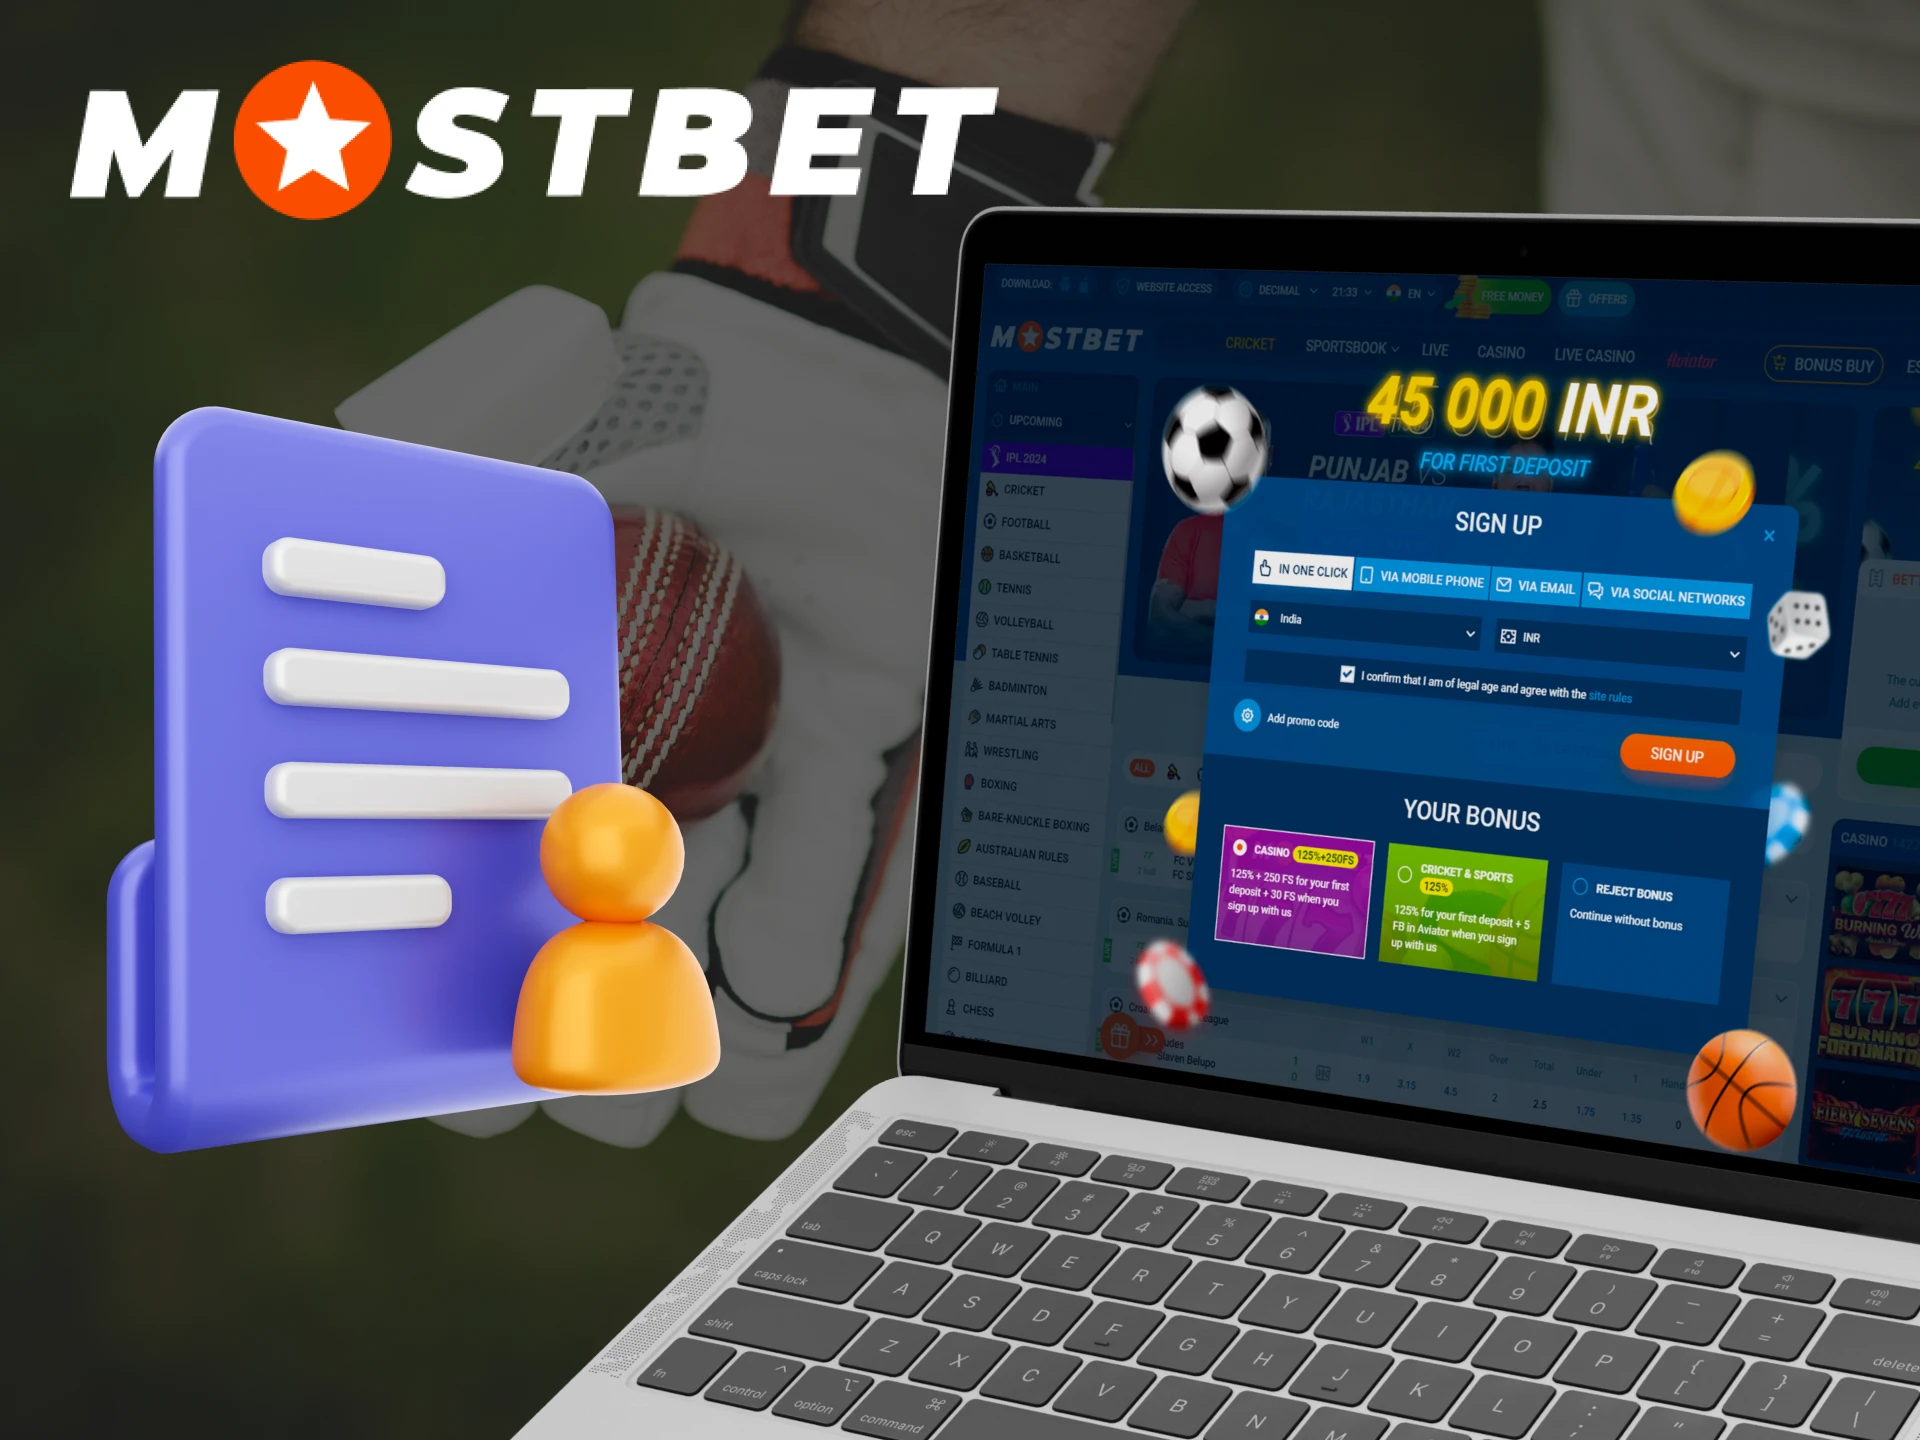 Register with Mostbet using your favorite method.